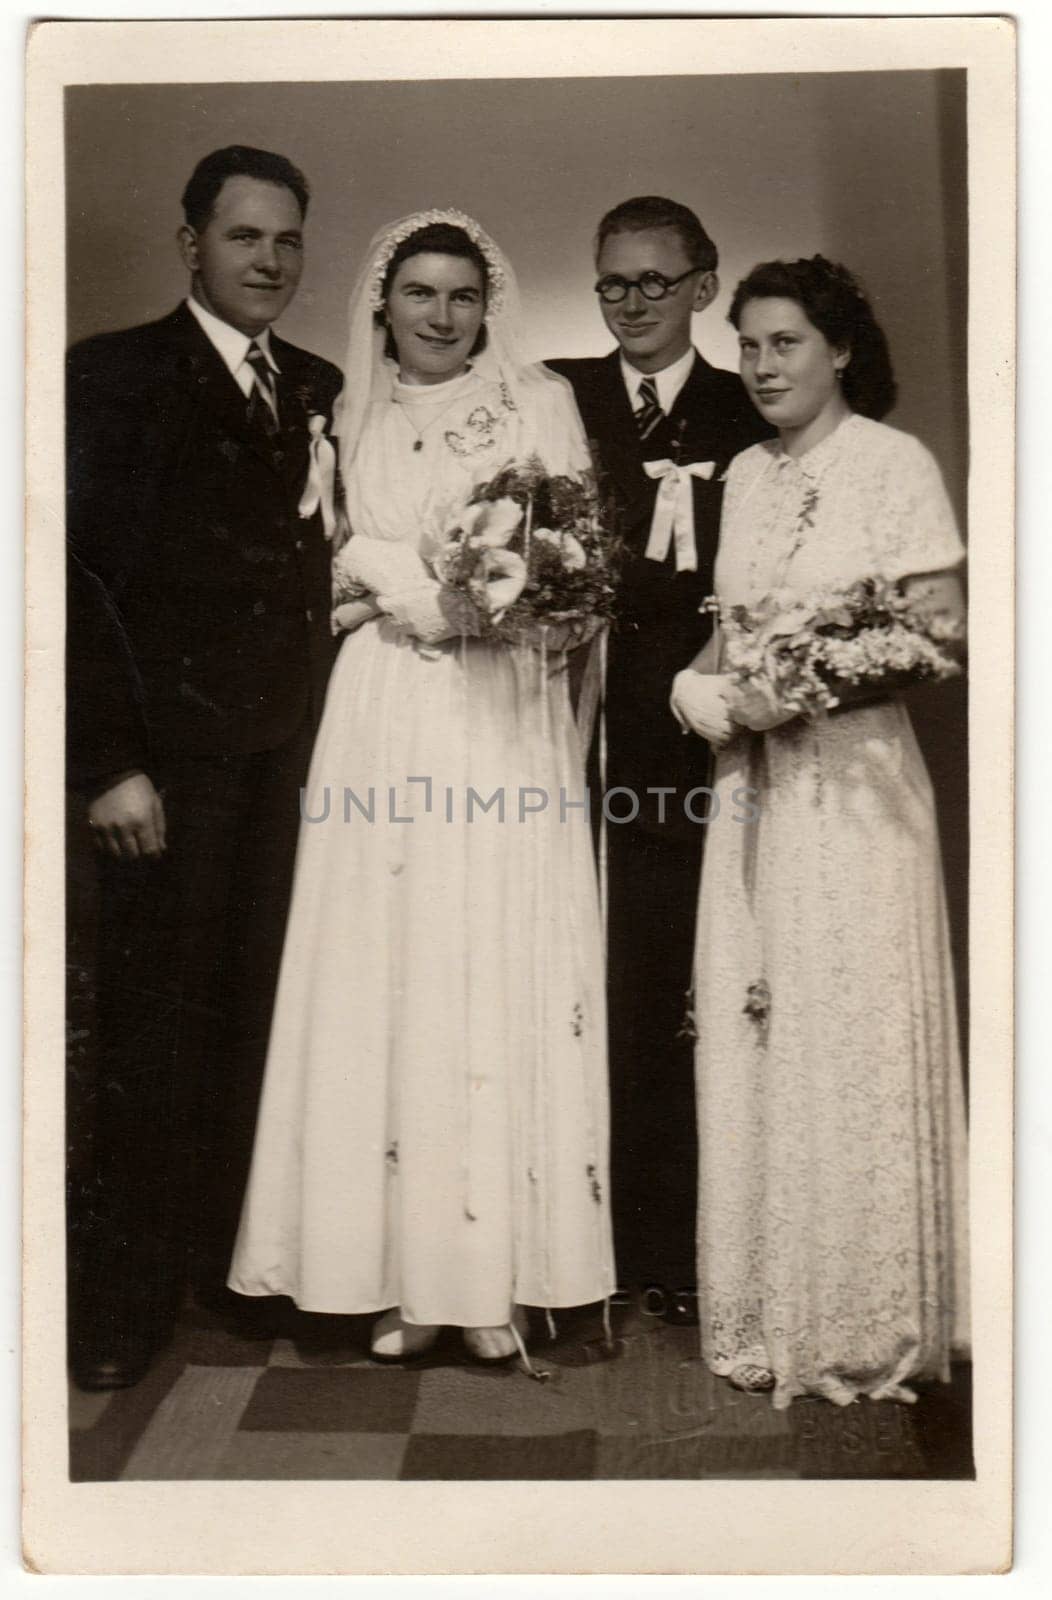 Vintage photo shows newlyweds and bridesman with bridesmaid. Retro black and white photography. Circa 1920s. by roman_nerud